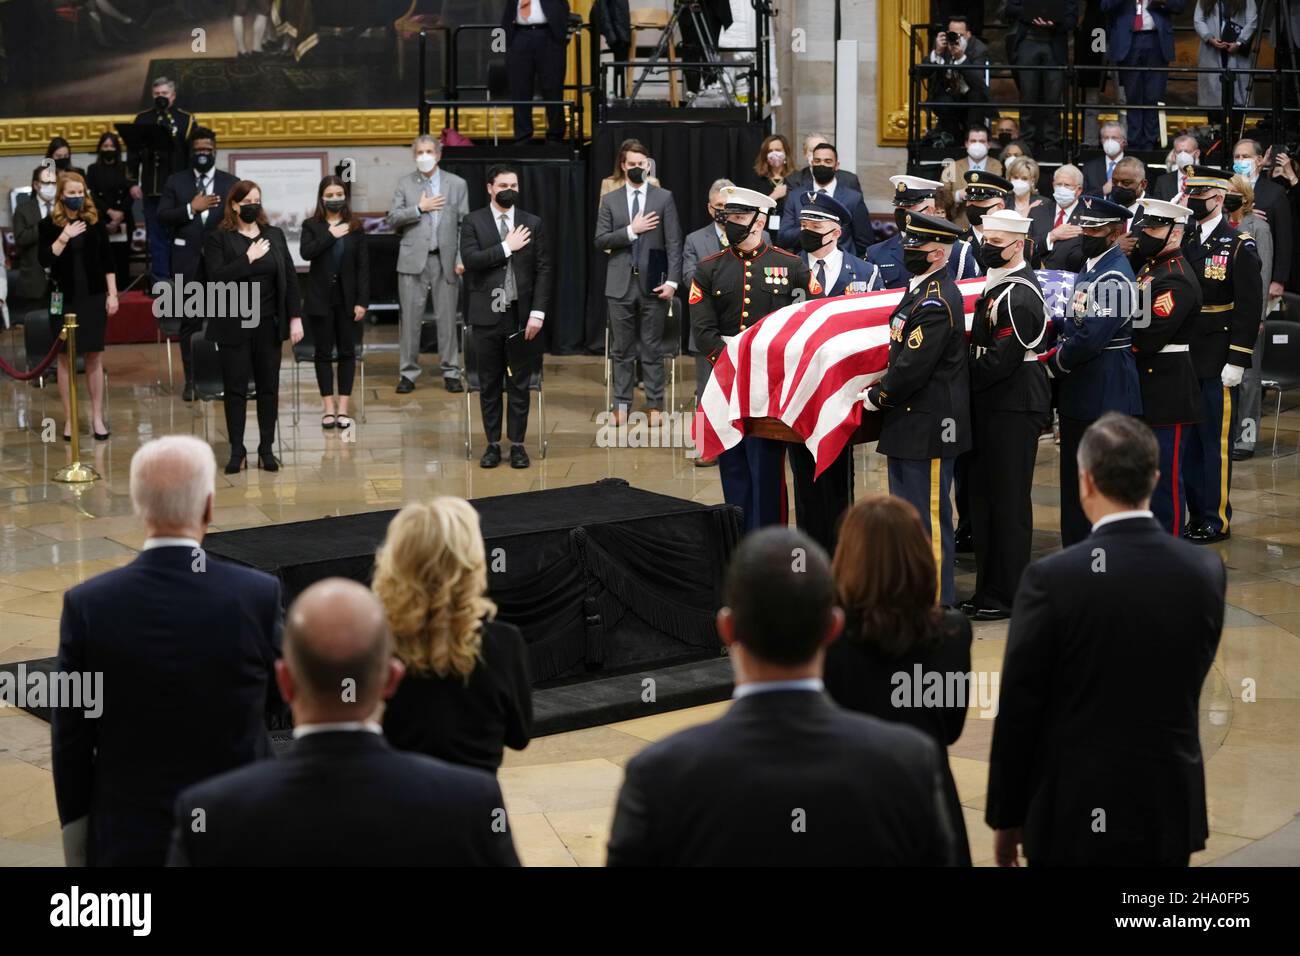 The casket of former Senator Bob Dole (R-KS) arrives to lie in state at the Rotunda of the U.S. Capitol in Washington, DC on Thursday, December 9, 2021. Credit: Sarahbeth Maney/Pool via CNP /MediaPunch Stock Photo